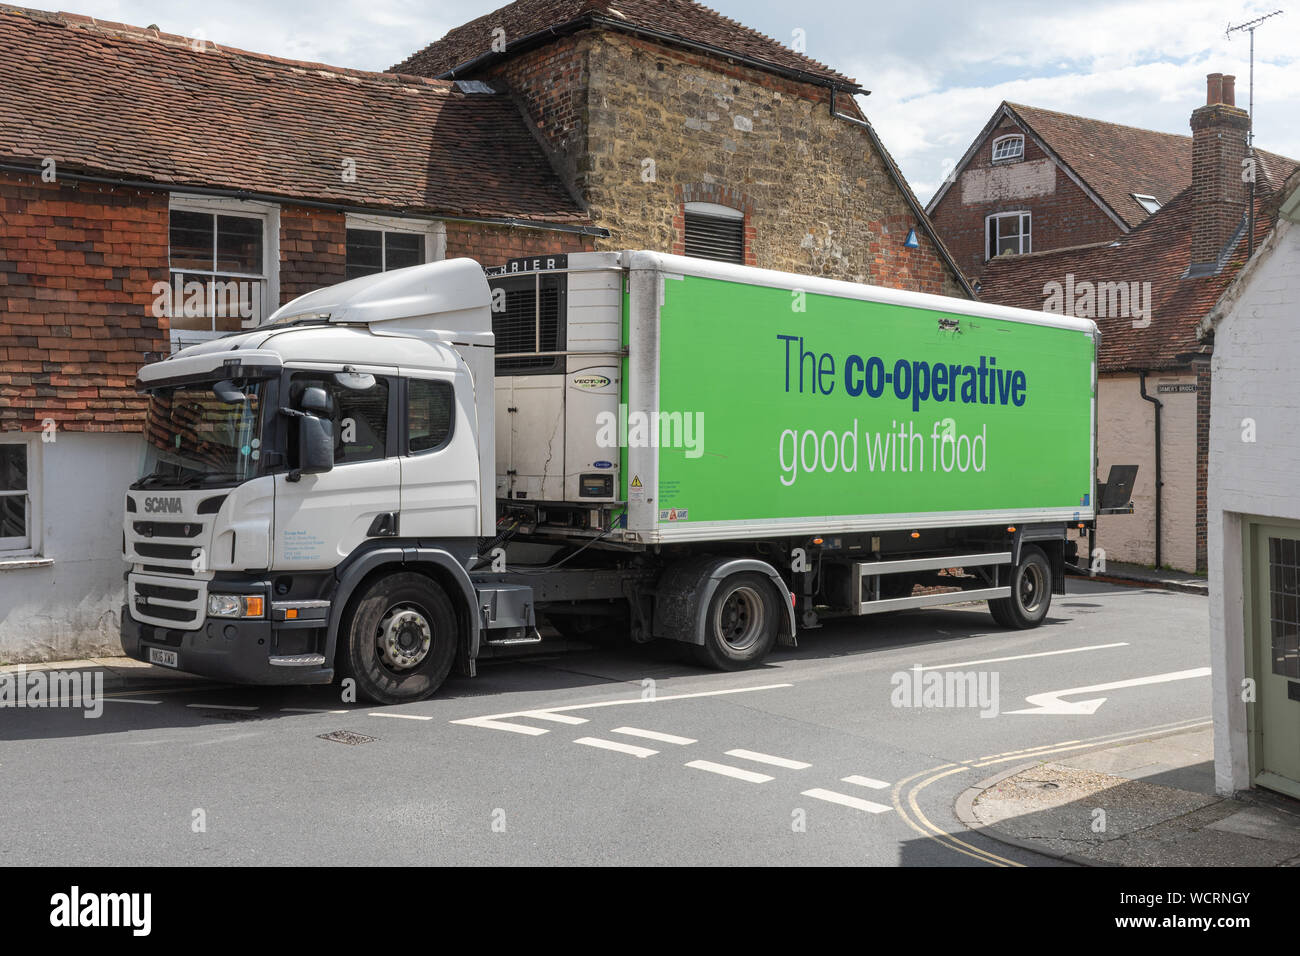 A co-op (co-operative) food delivery lorry truck van delivering goods to a shop, UK Stock Photo